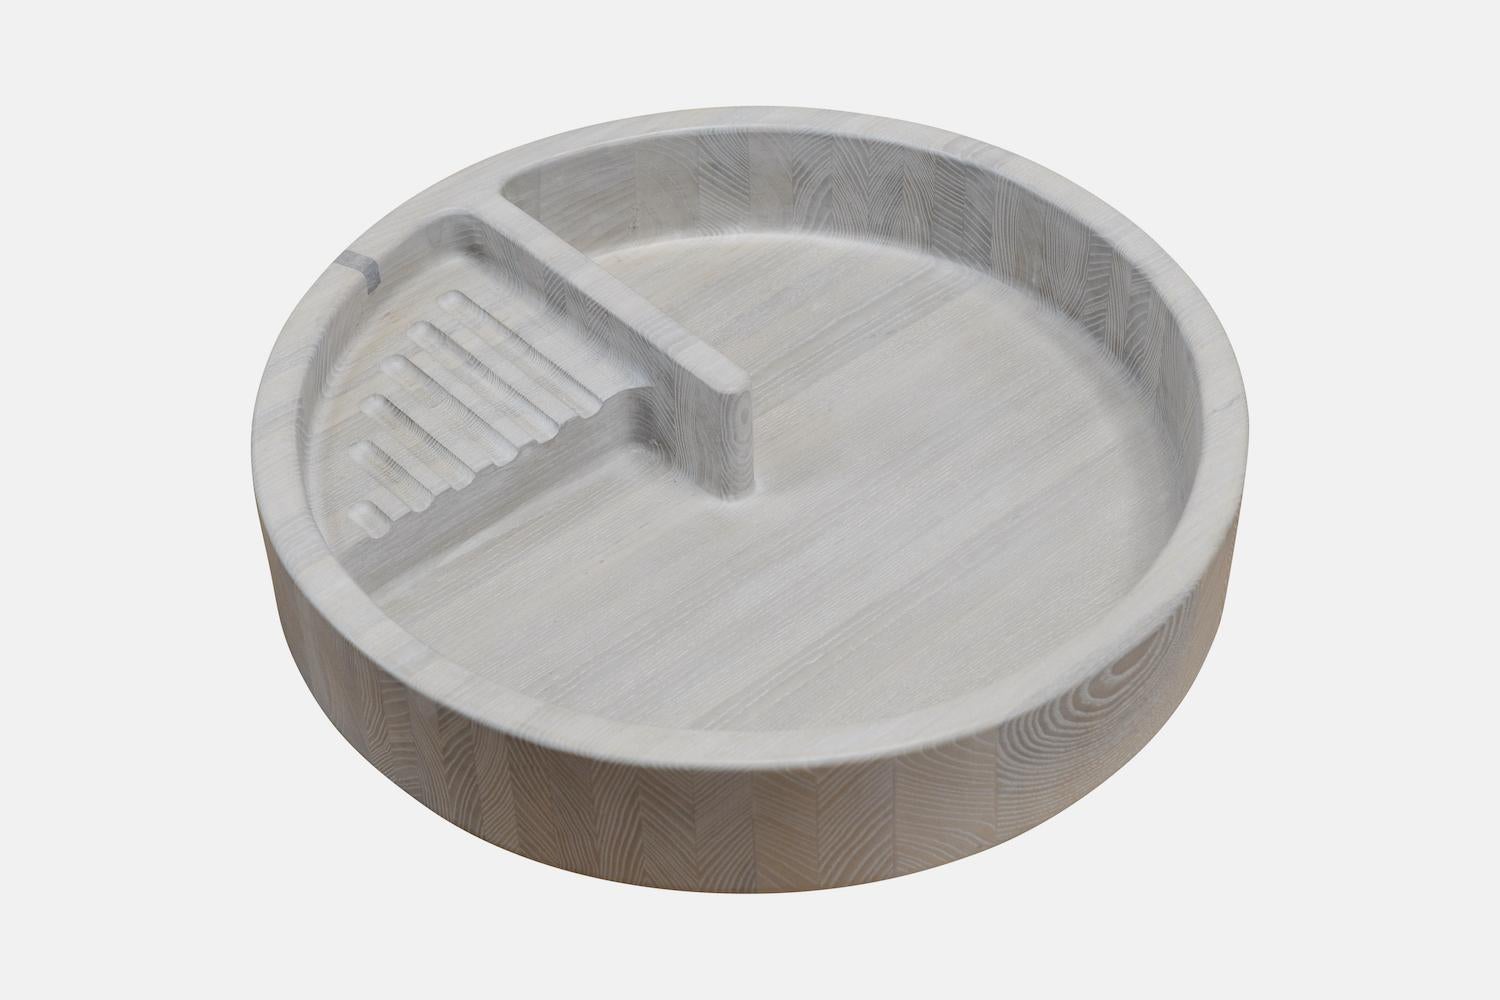 The Gannett bowl is an exploration in geometry, surface planes and defined wood grain. The perfect conversation piece that will also serve its function for gatherings with friends or family. 

Finished with 100% food safe oil. 

FSC certified solid